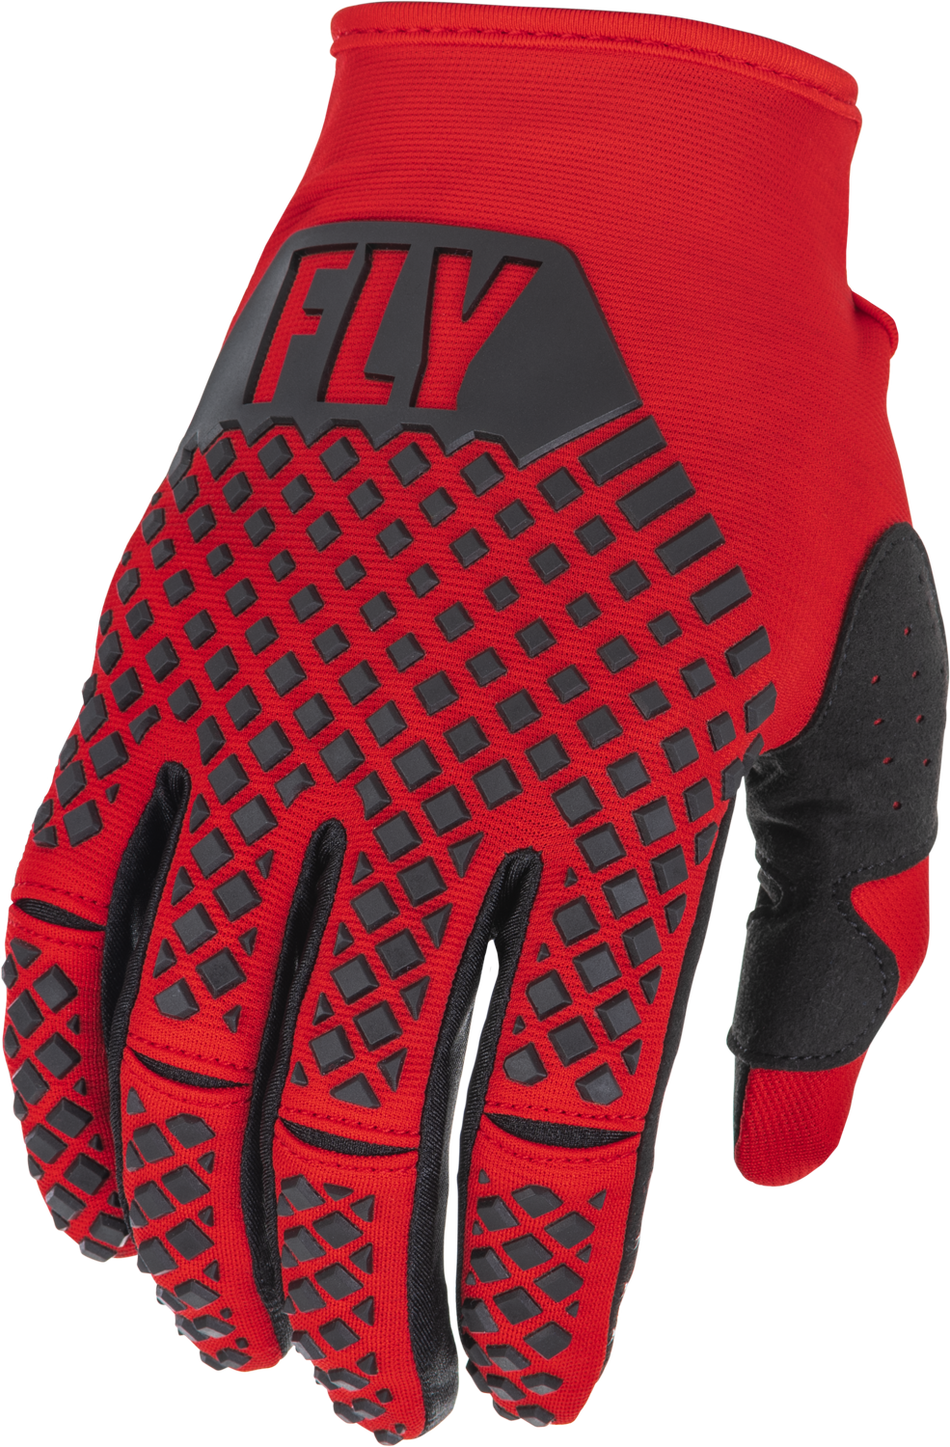 FLY RACING Kinetic Gloves Red/Black 3x 375-4133X